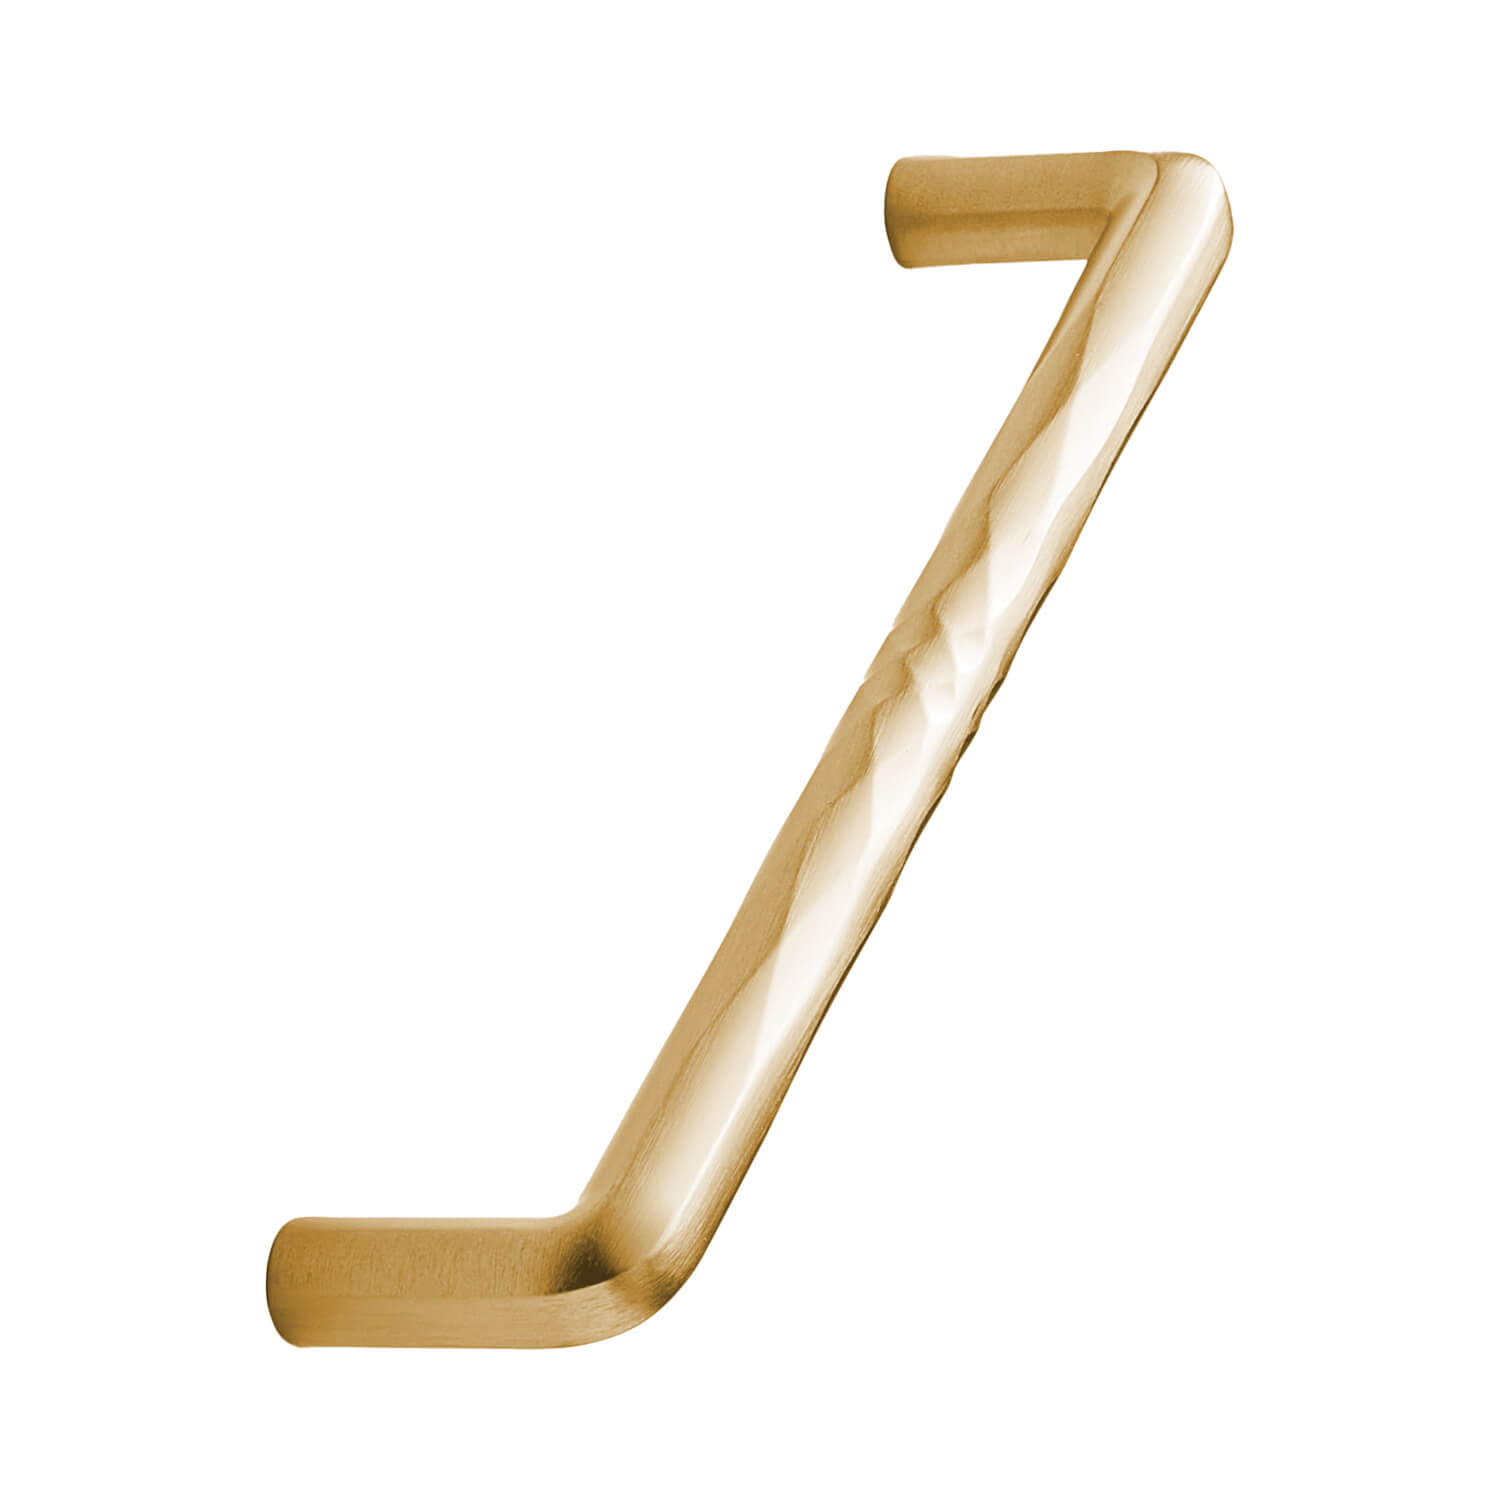 Furnipart cabinet handle - Brushed gold - Model Shuffle